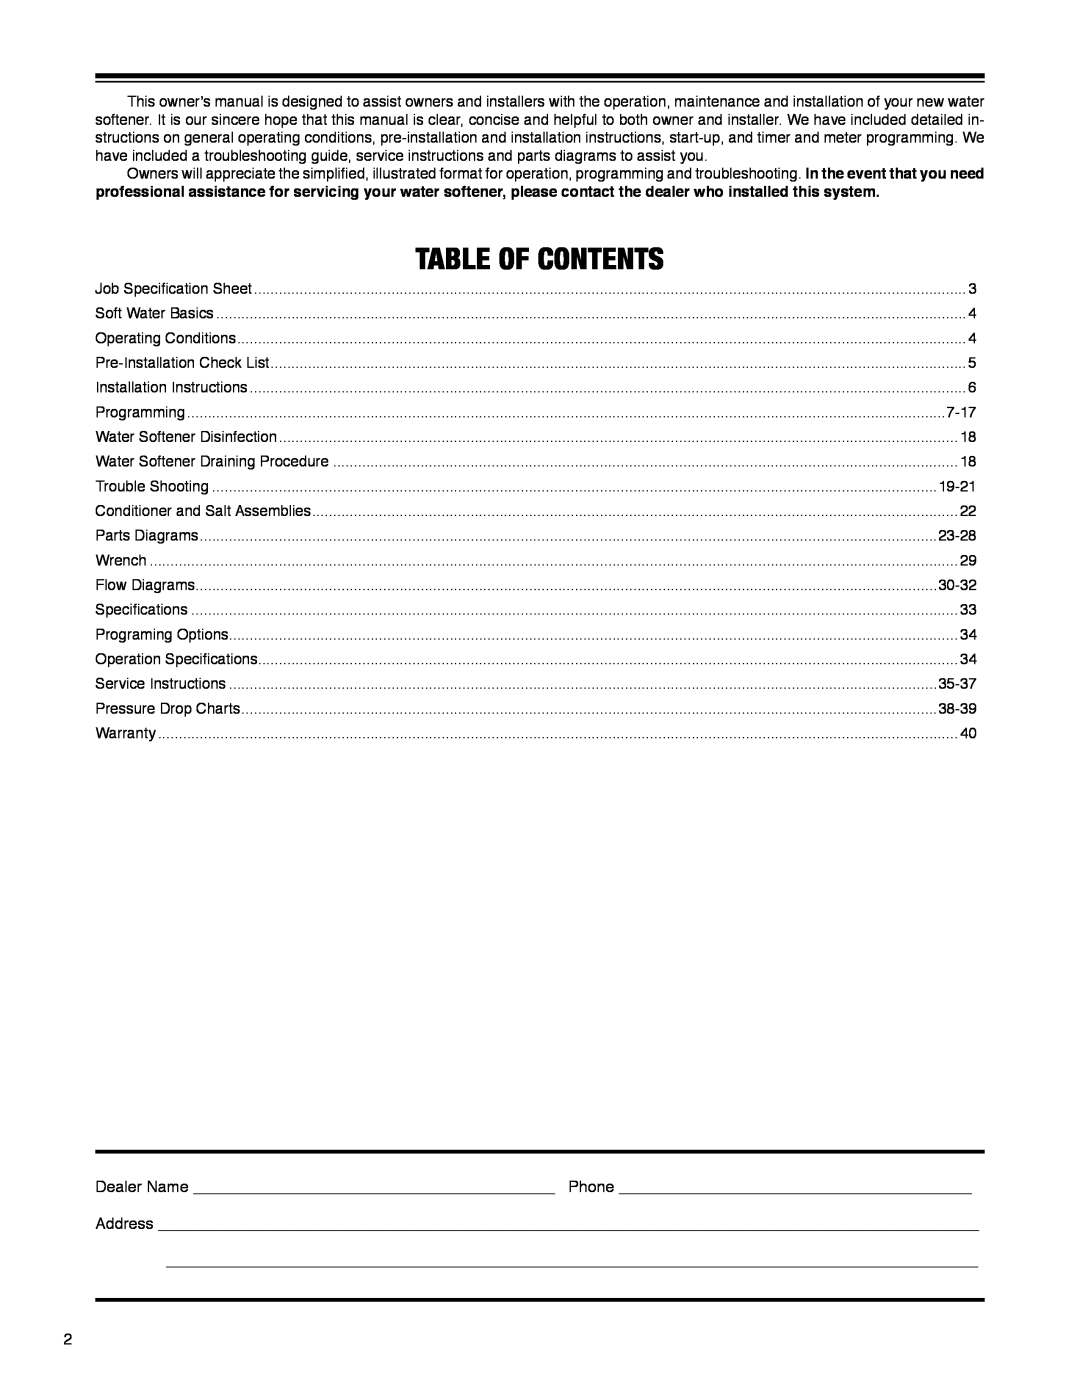 Argosy Research H-125 Series owner manual Table of Contents, Dealer Name Phone Address 